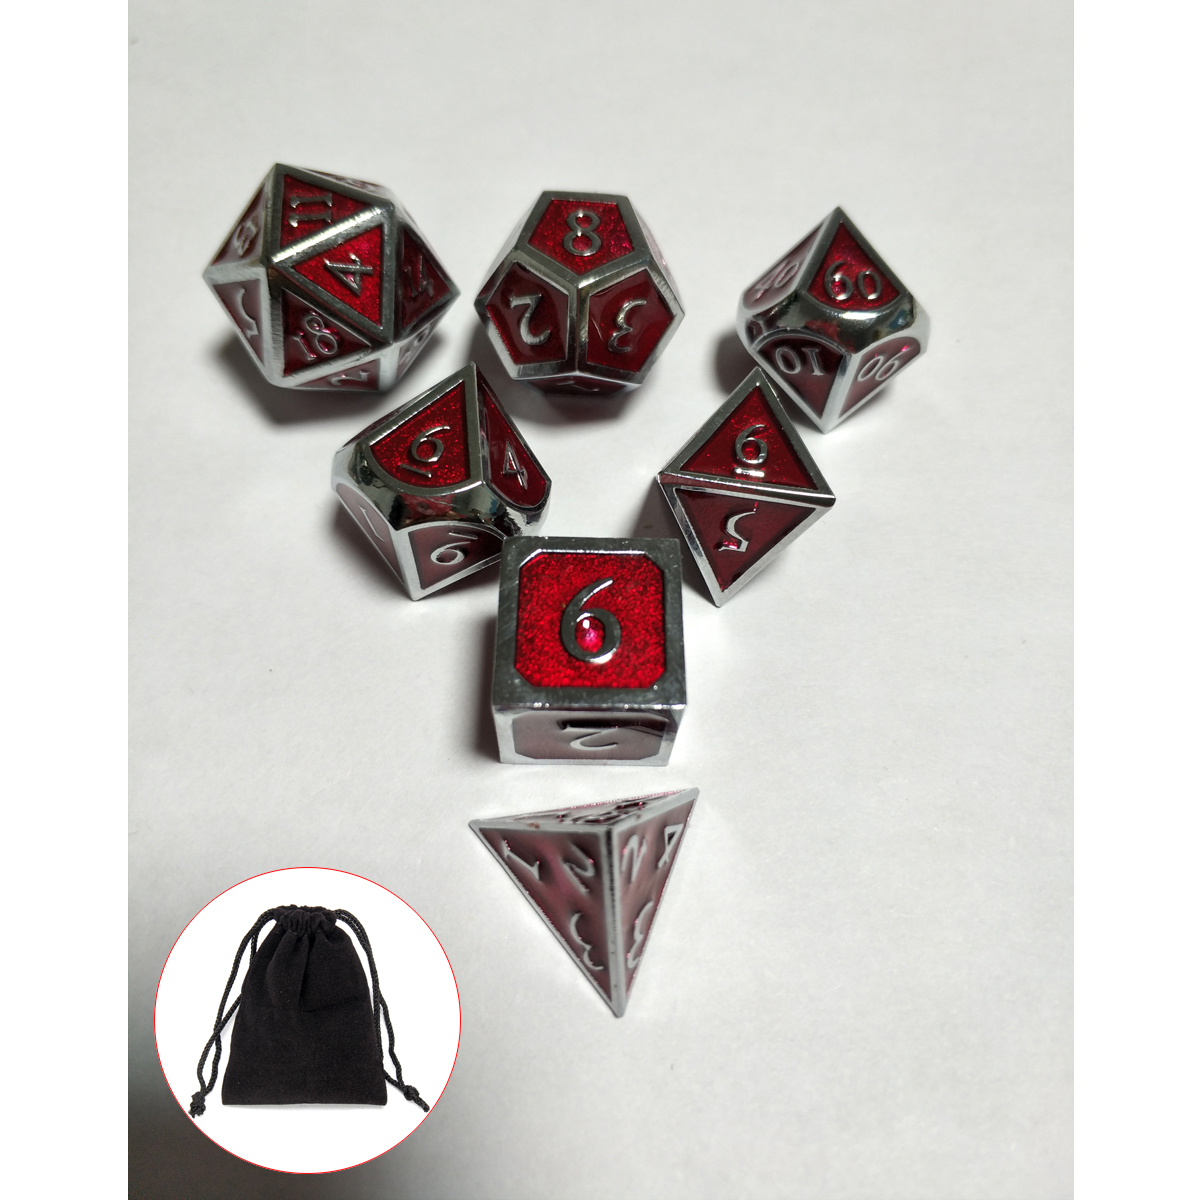 7Pcs-Embossed-Heavy-Metal-Polyhedral-Dice-DND-RPG-MTG-Role-Playing-Game-With-Storage-Bag-1372274-8